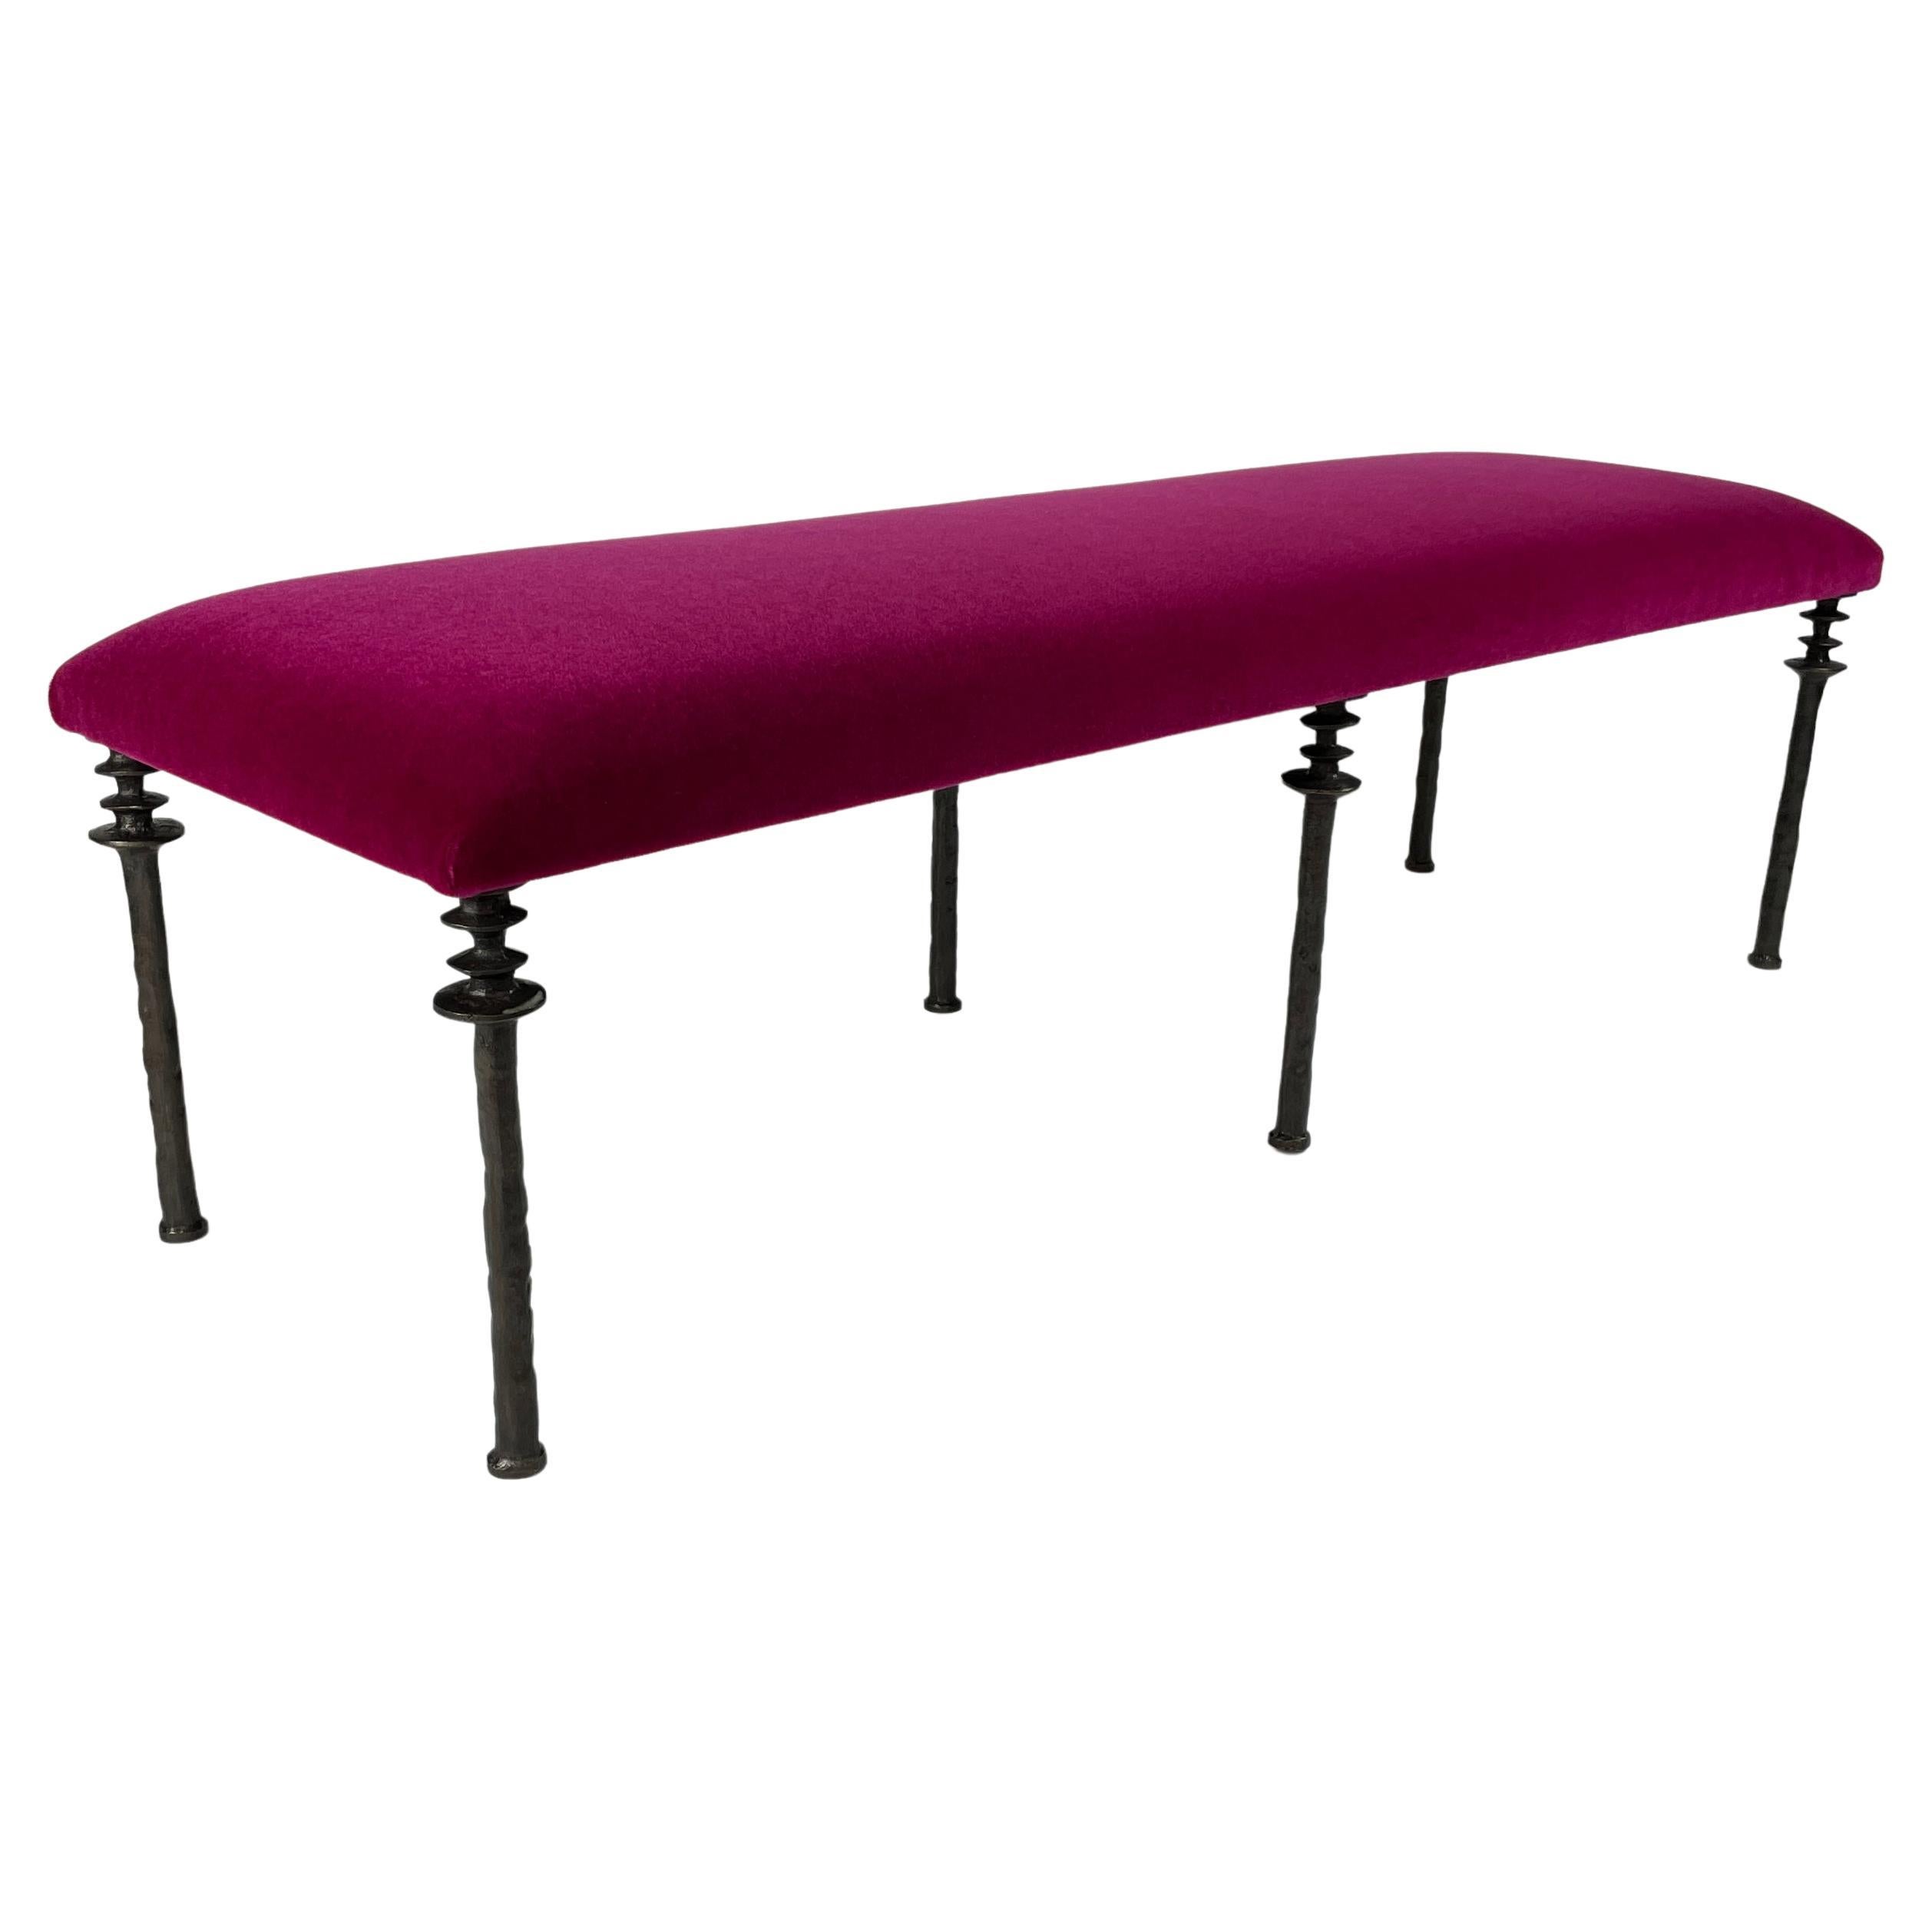 Inspired by Diego Giacometti, this bench is ideal for those who are looking for unique seating. Their cast bronze legs provide a truly organic touch. The cushion has been upholstered in a Pierre Frey Mohair fabric. The seat can be upholstered in a